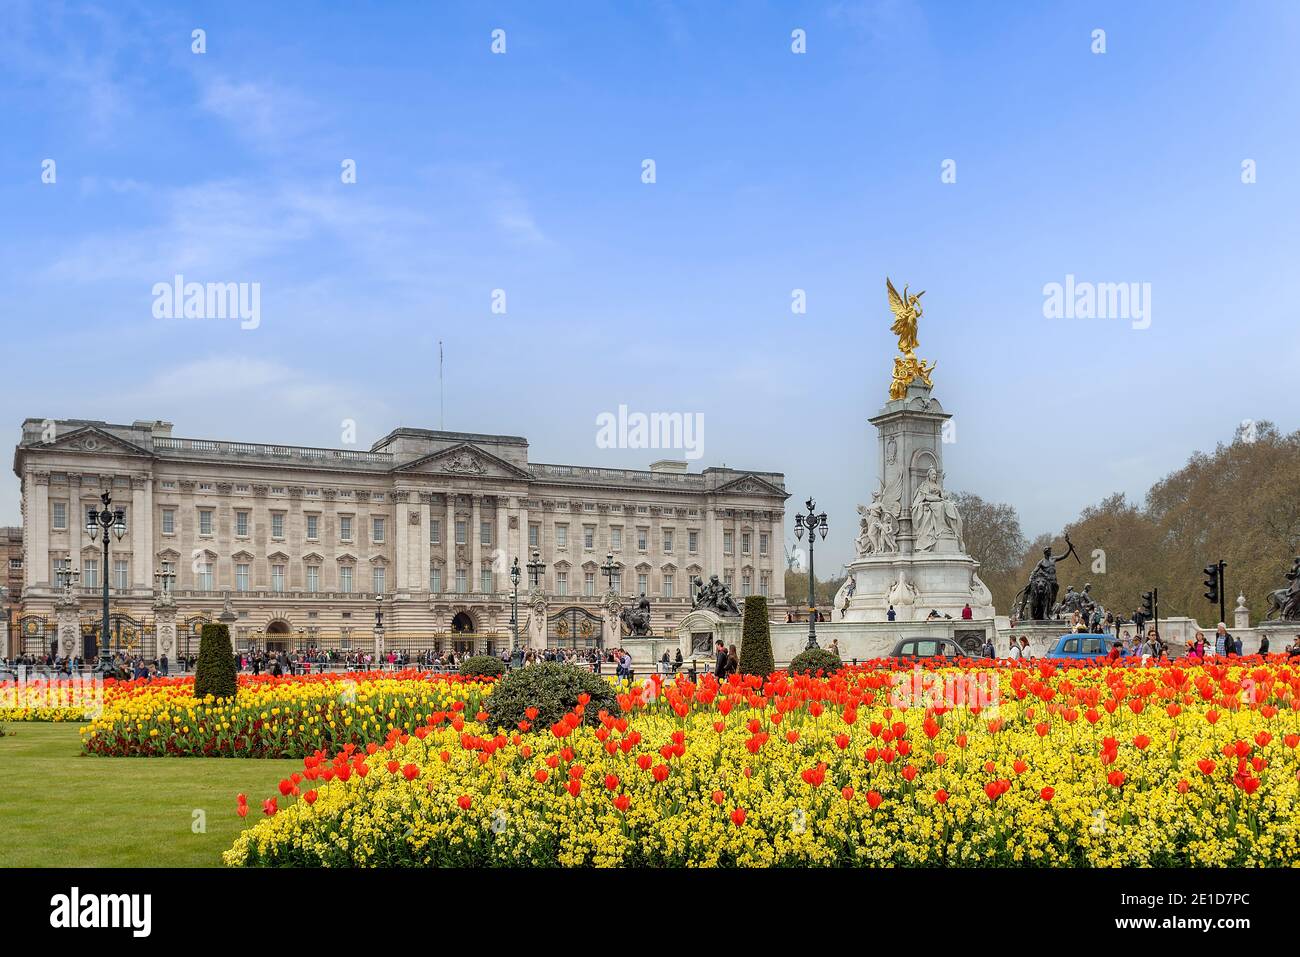 The outside of Buckingham Palace in London, England showing the main Palace, Victoria Memorial and flowers. Stock Photo